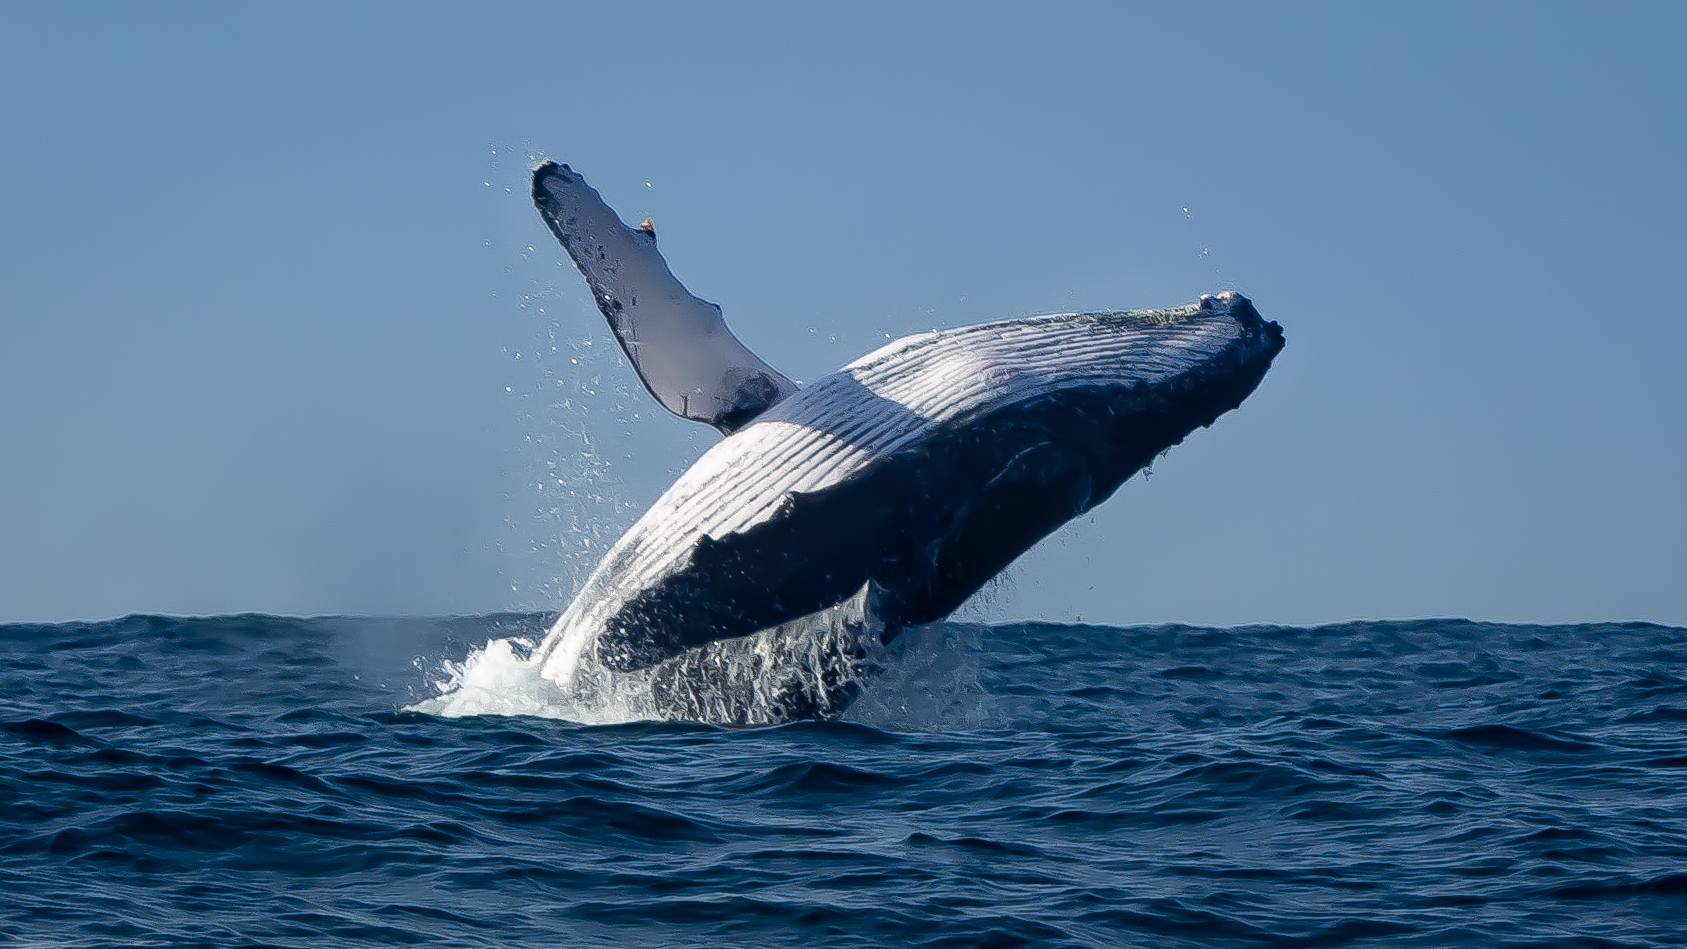 Cary Yanny images Special Project Breaching Sperm Whales